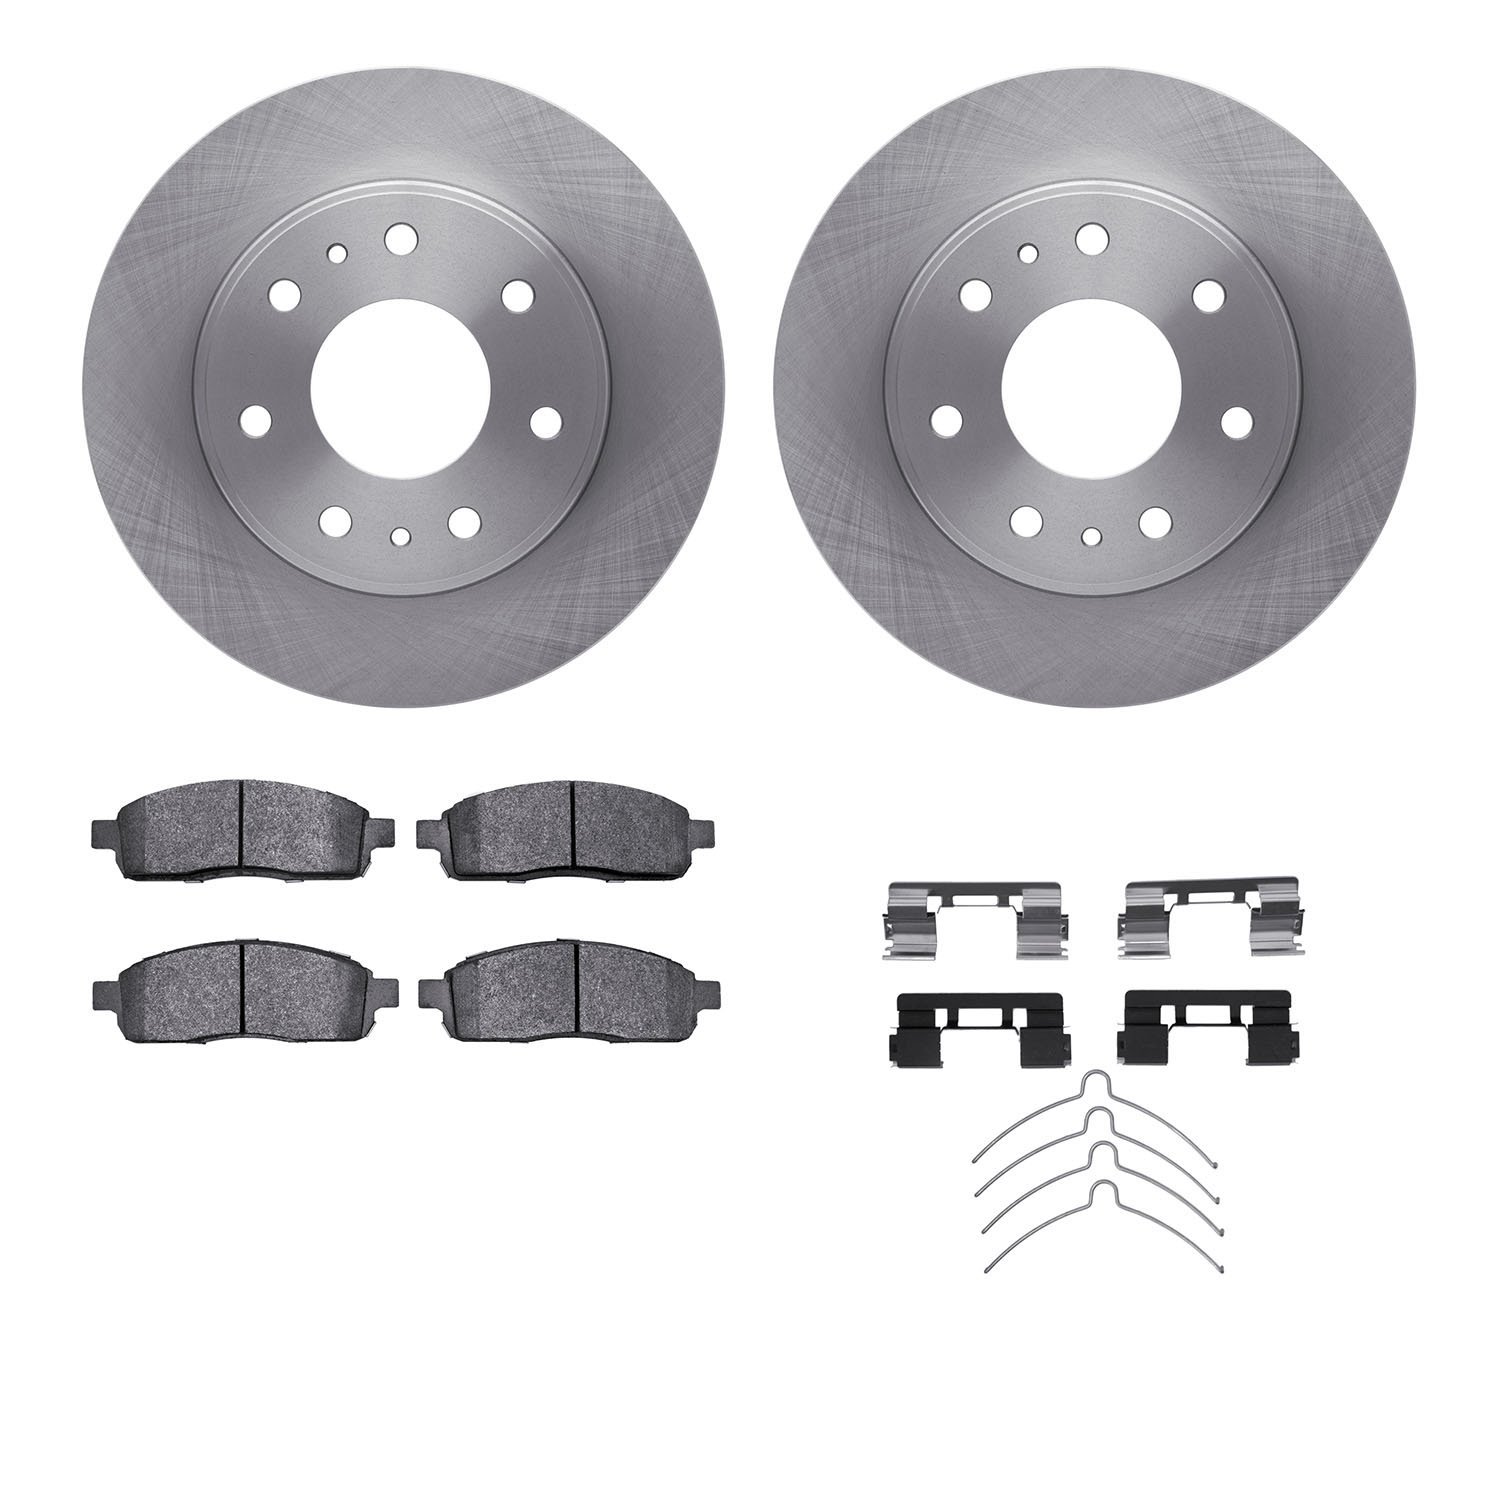 6412-54281 Brake Rotors with Ultimate-Duty Brake Pads Kit & Hardware, 2009-2009 Ford/Lincoln/Mercury/Mazda, Position: Front